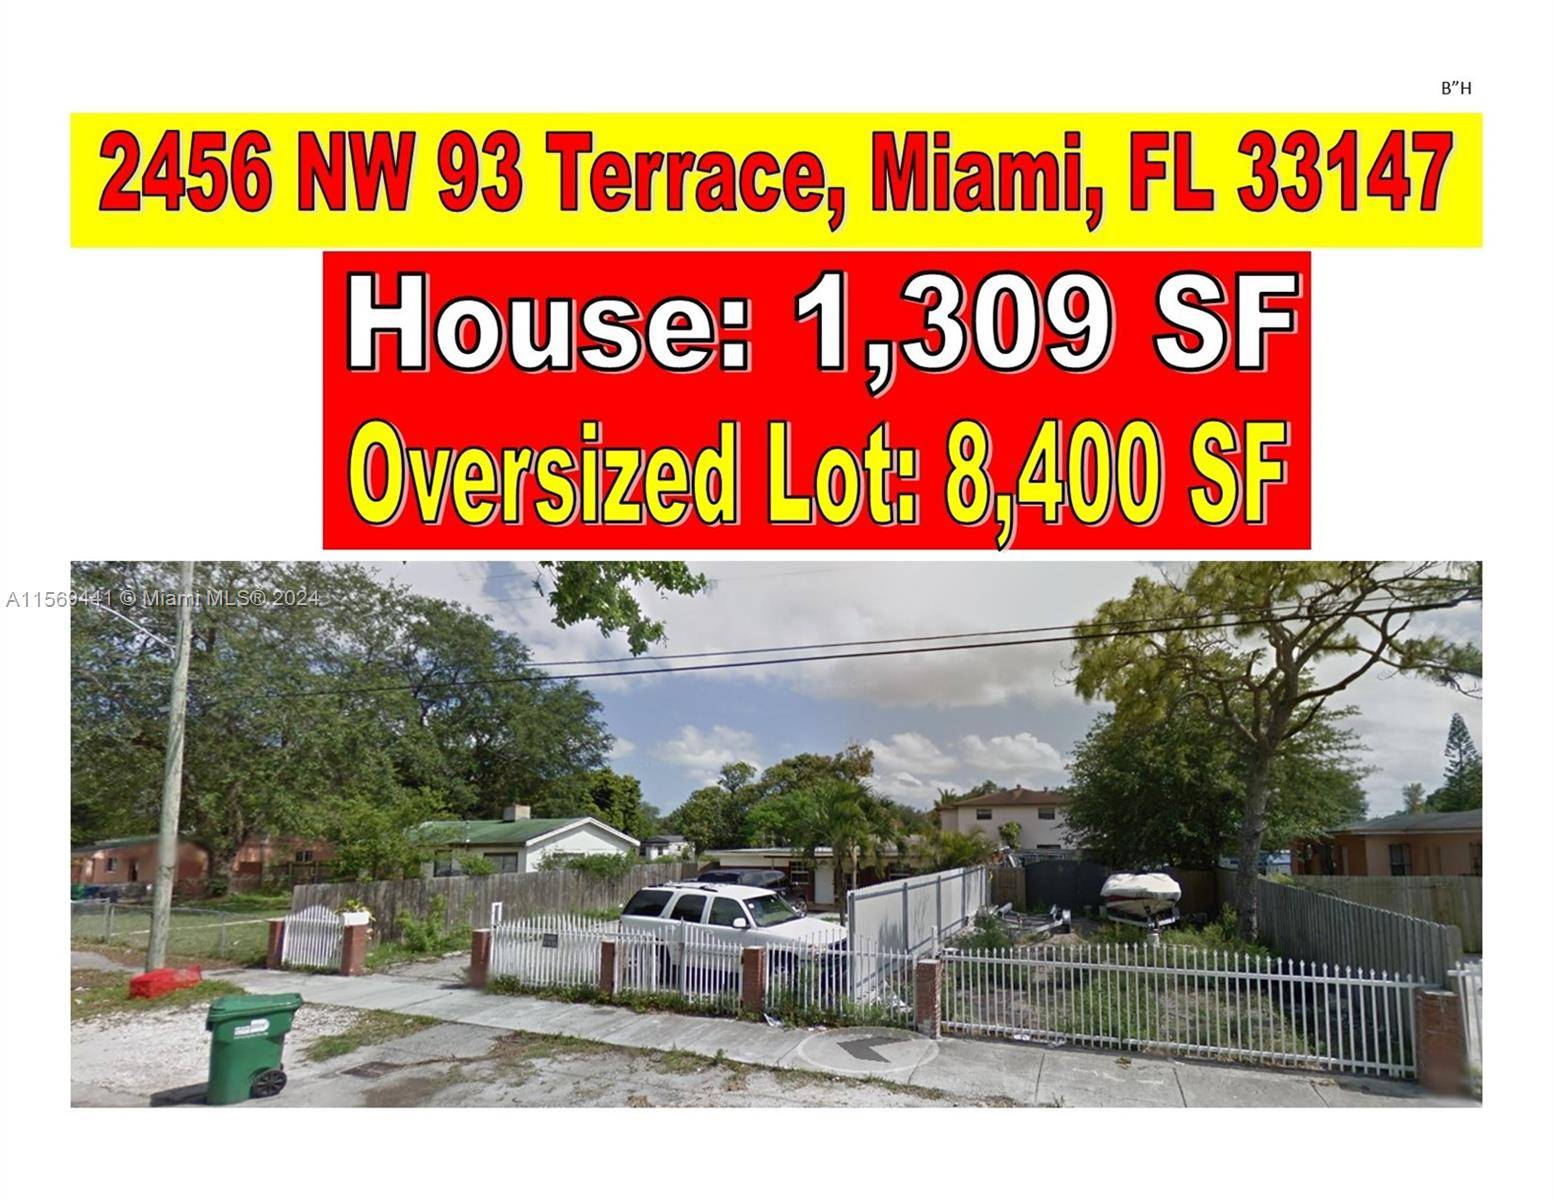 Amazing Location House Living Area is 1, 309 SF situated in a Oversized Lot of 8, 400 SF Approximate Frontage 111 and Depth 111 Feet Seller will finance with only ...